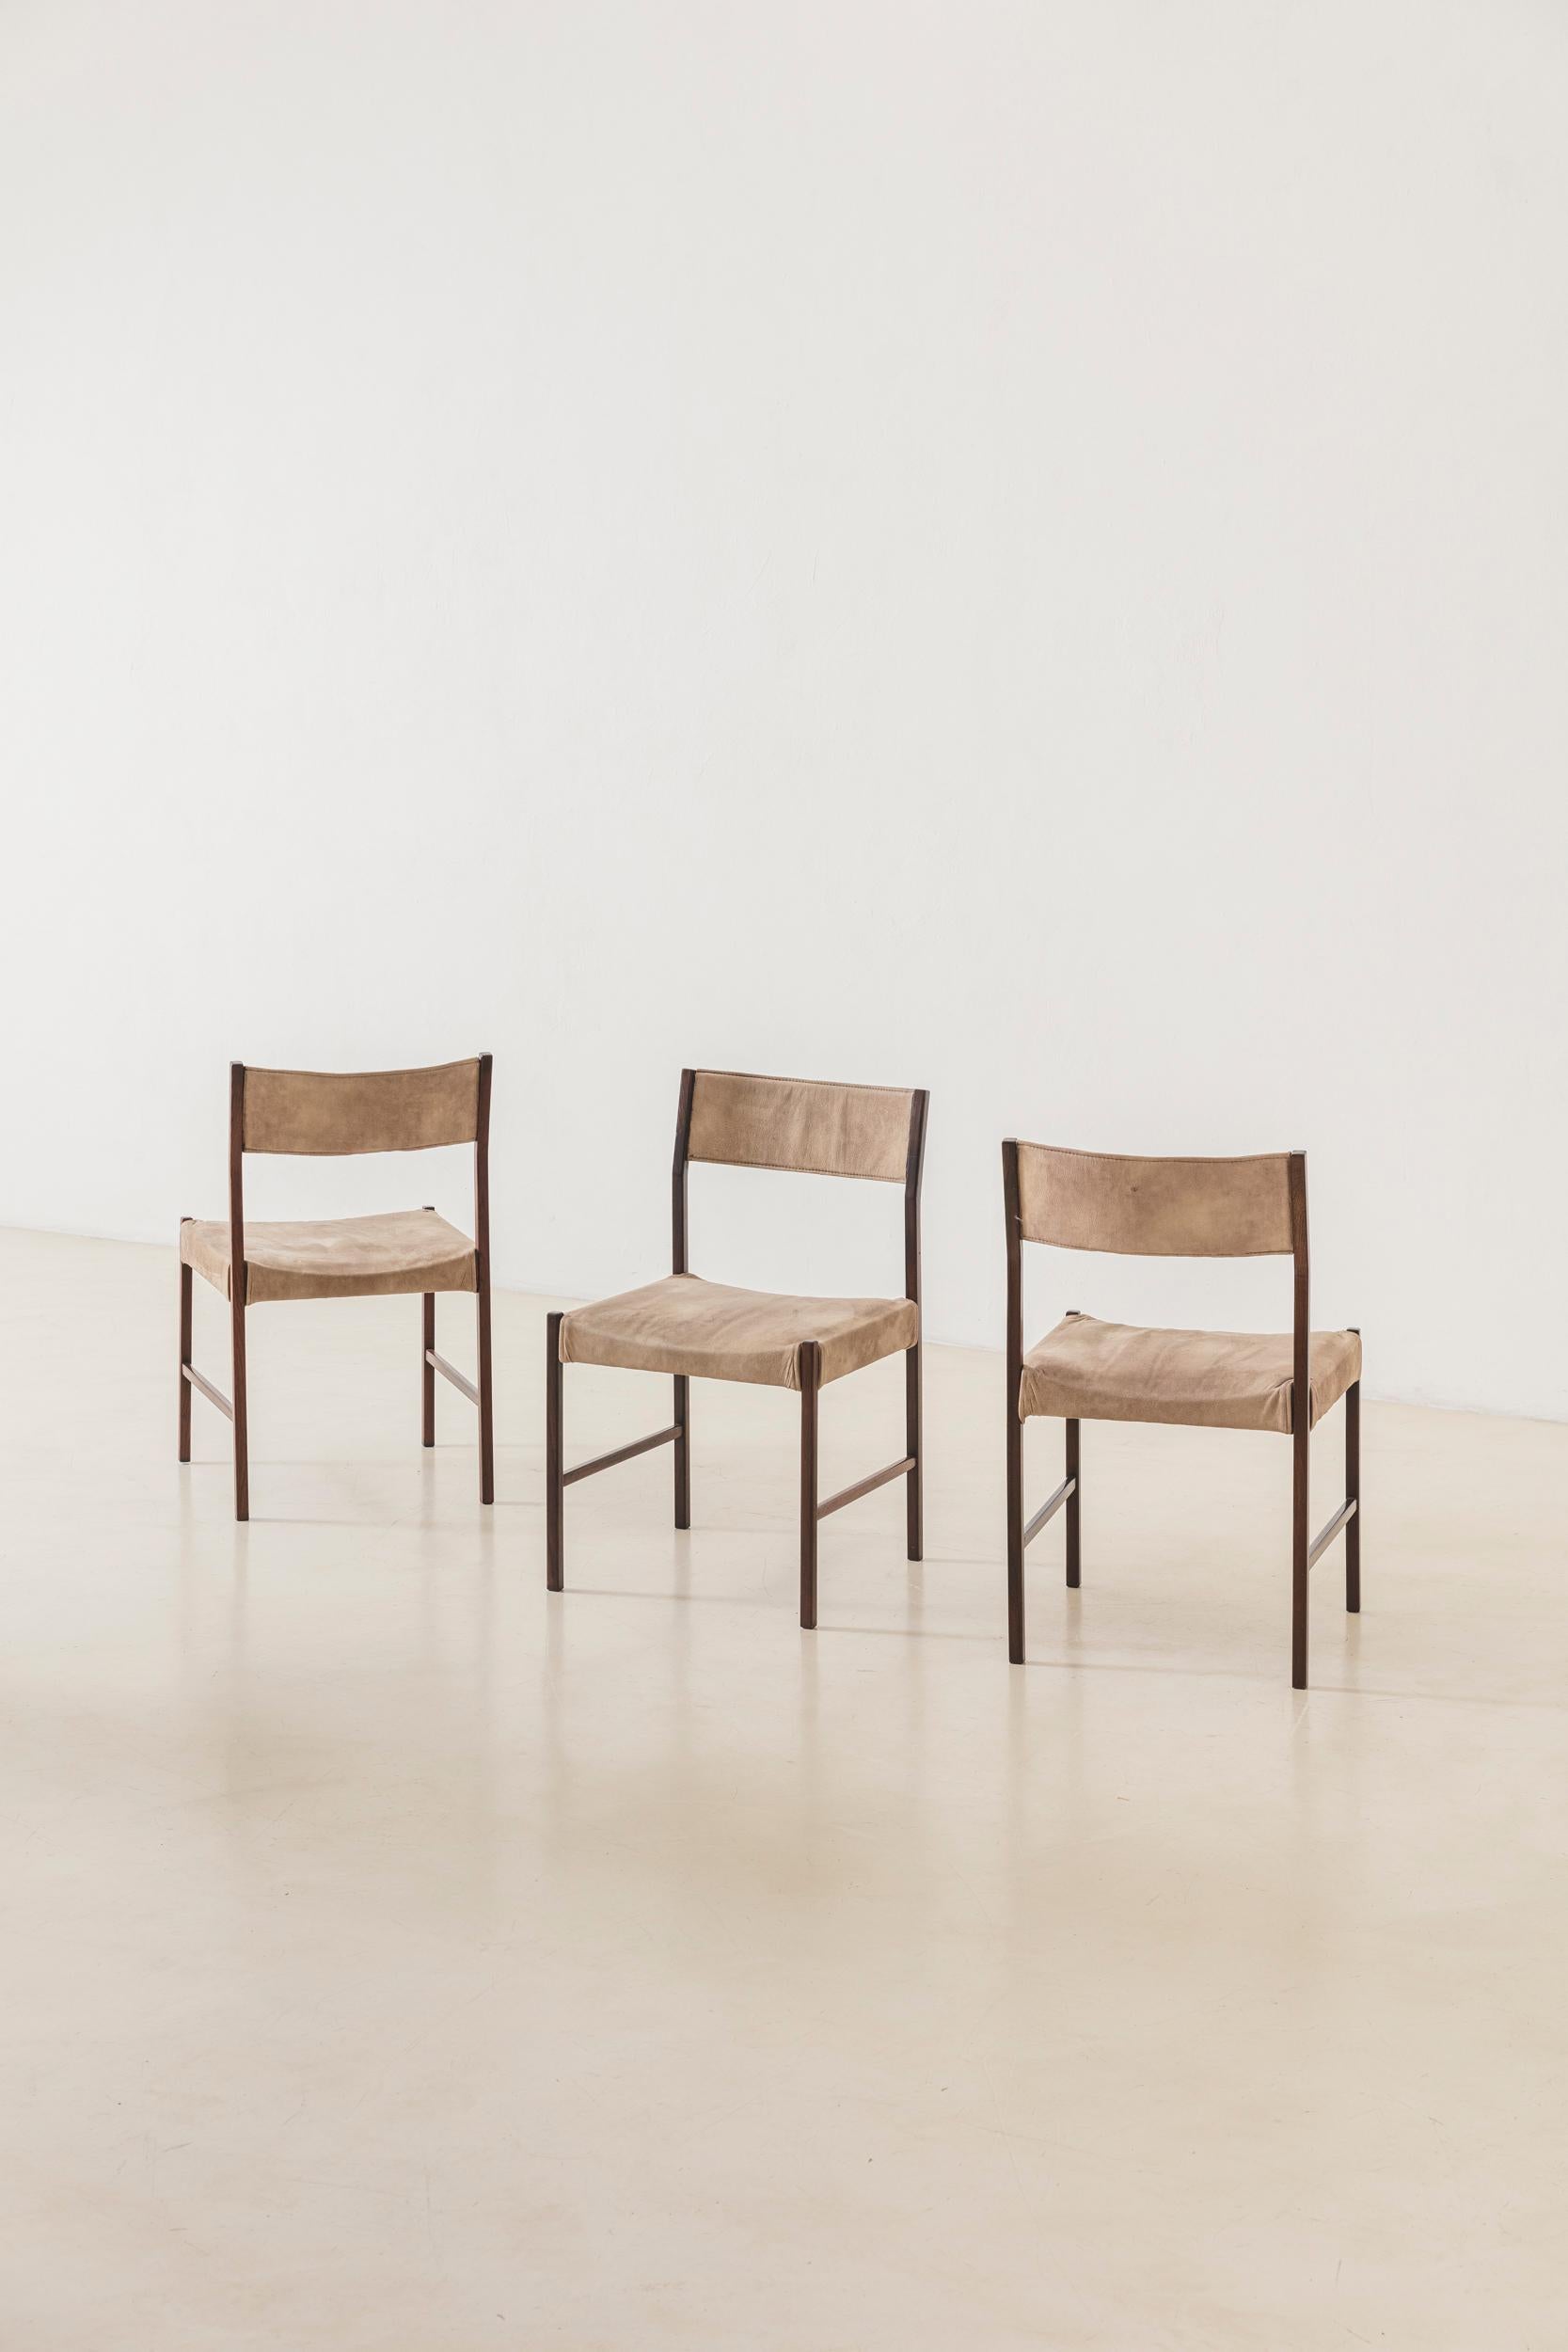 Set of 10 Itamaraty Dining Chairs by Brazilian Designer Jorge Zalszupin, 1959 In Good Condition For Sale In New York, NY